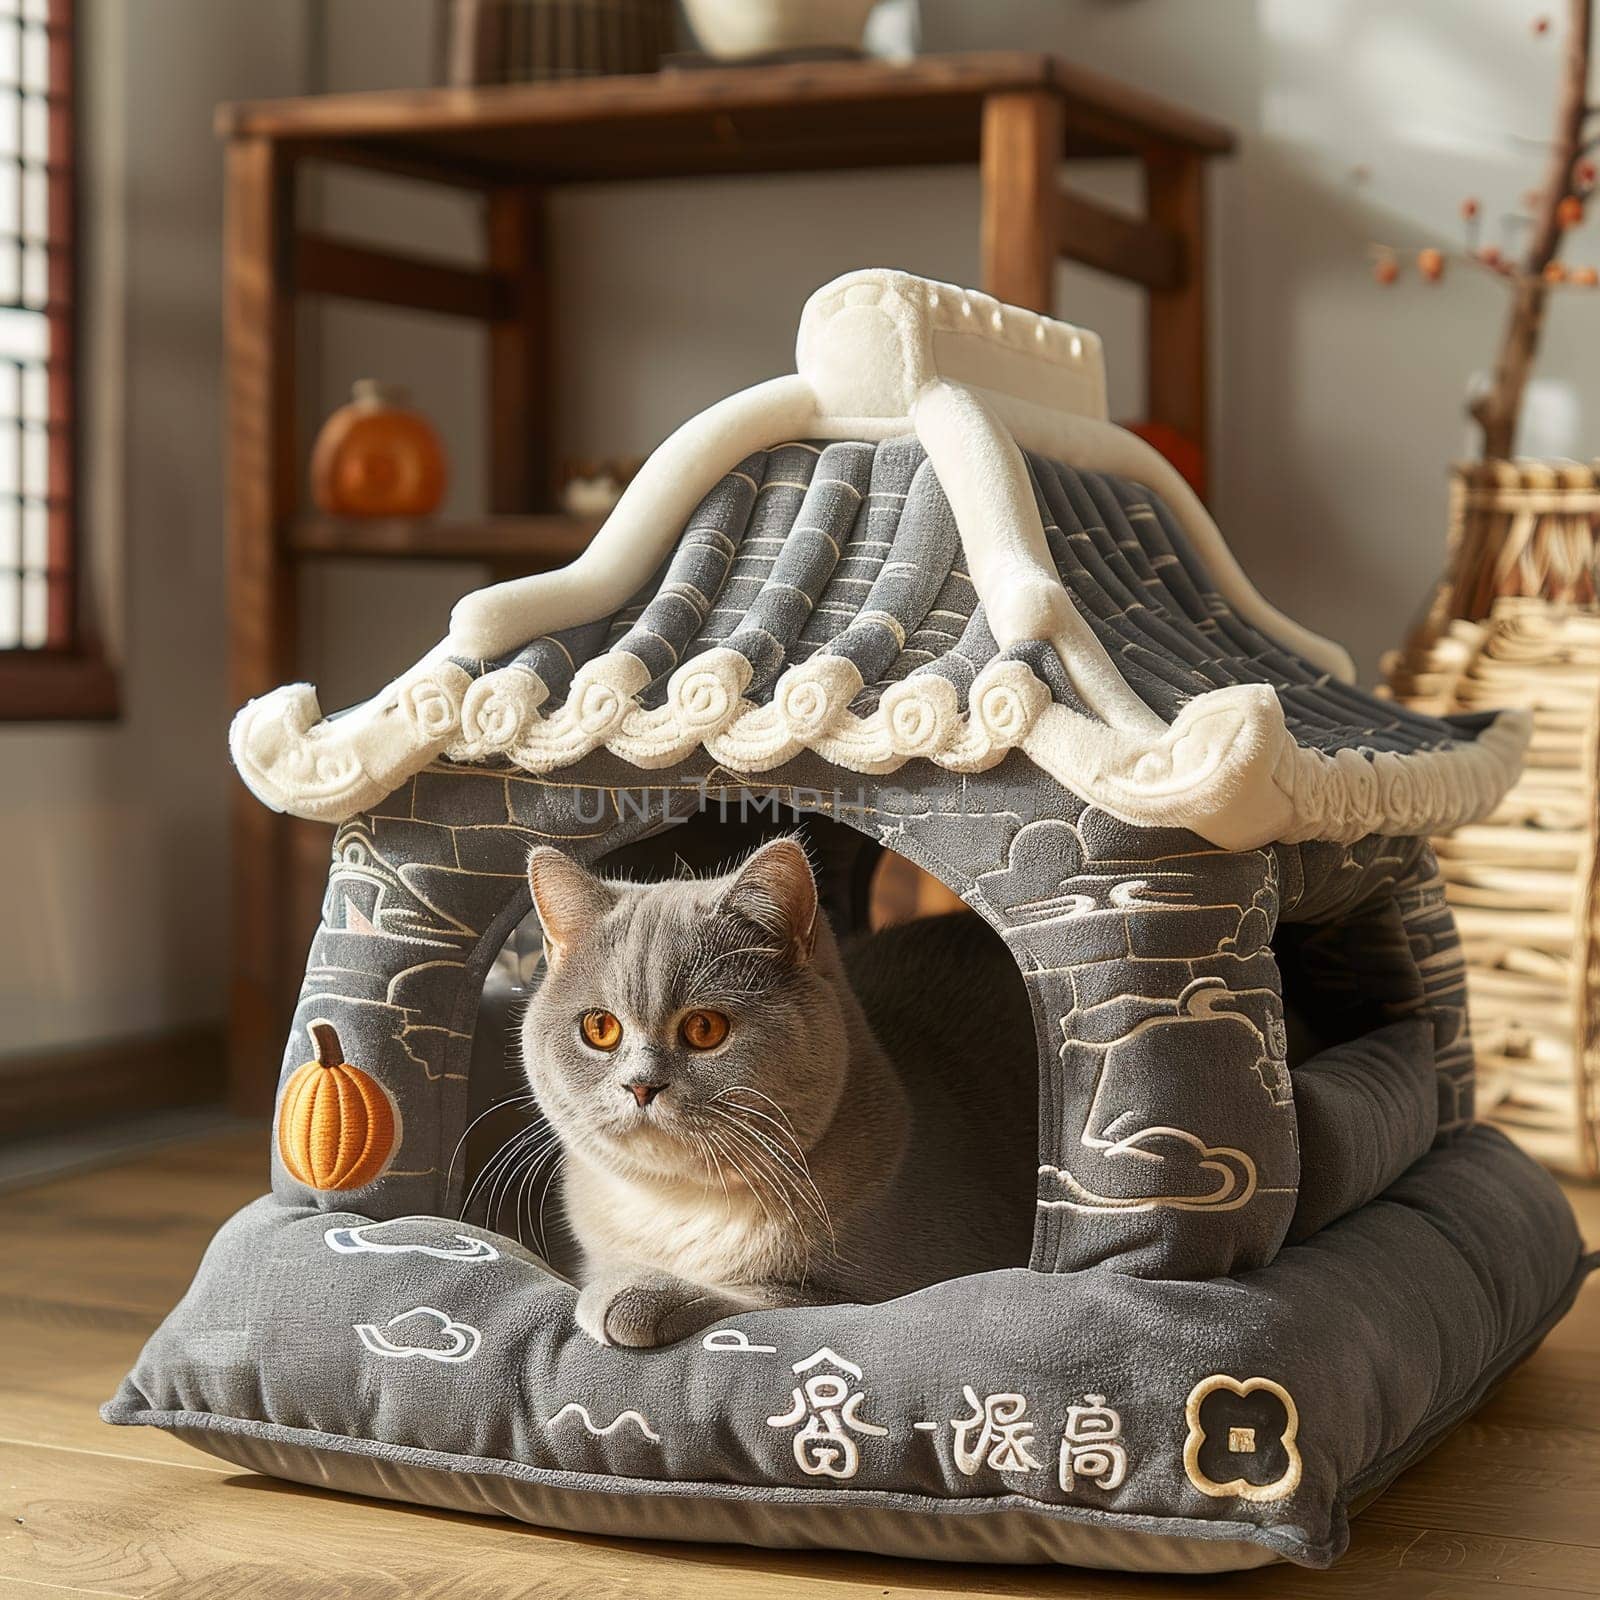 Cute cat in comfortable cat house has an ancient style.